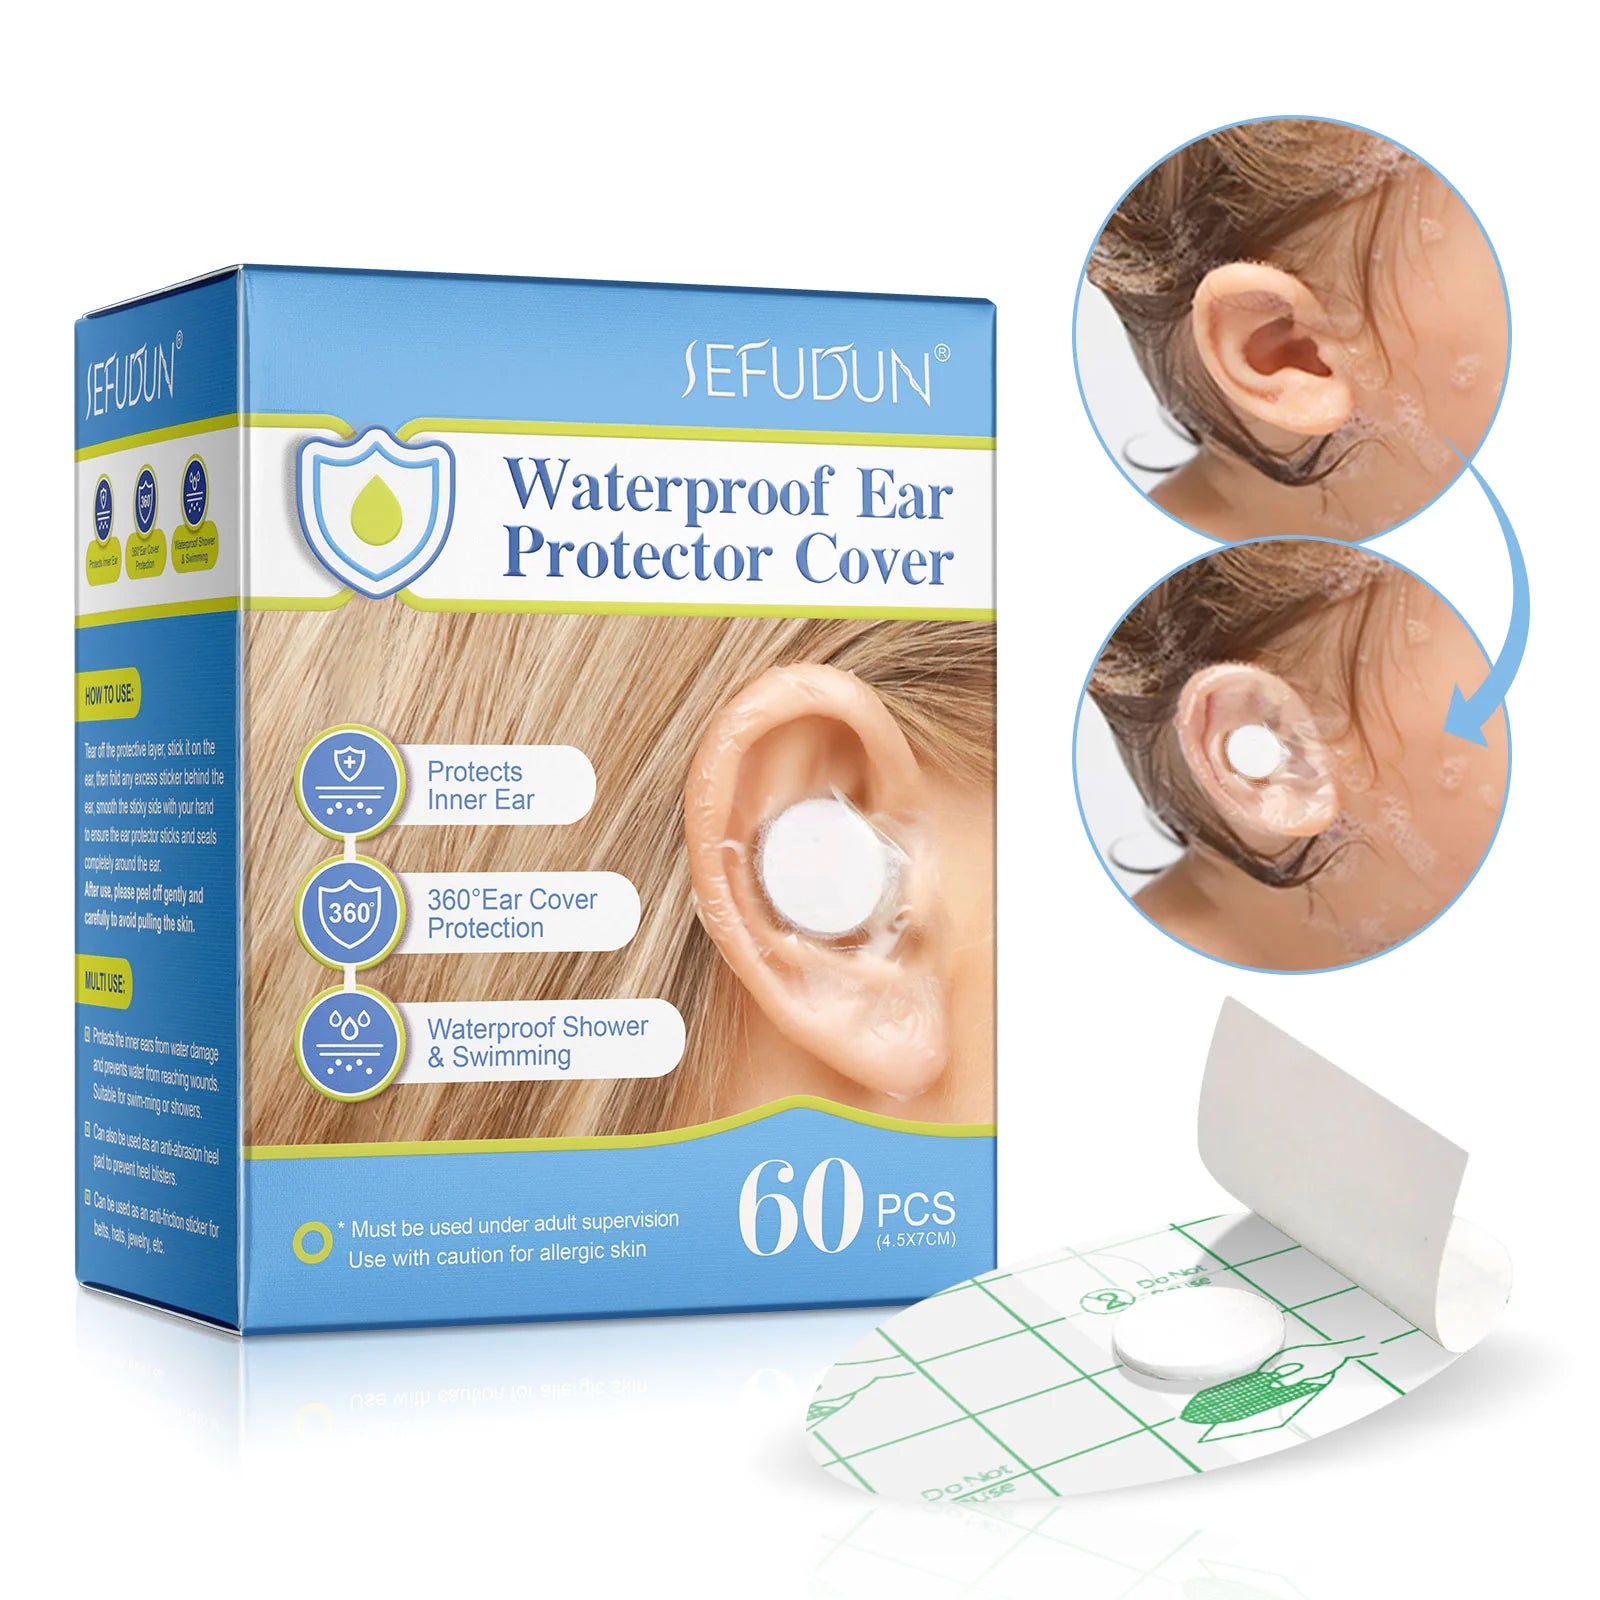 SEFUDUN Ear Covers for Shower 60 pcs ,Waterproof Ear Protector Covers.